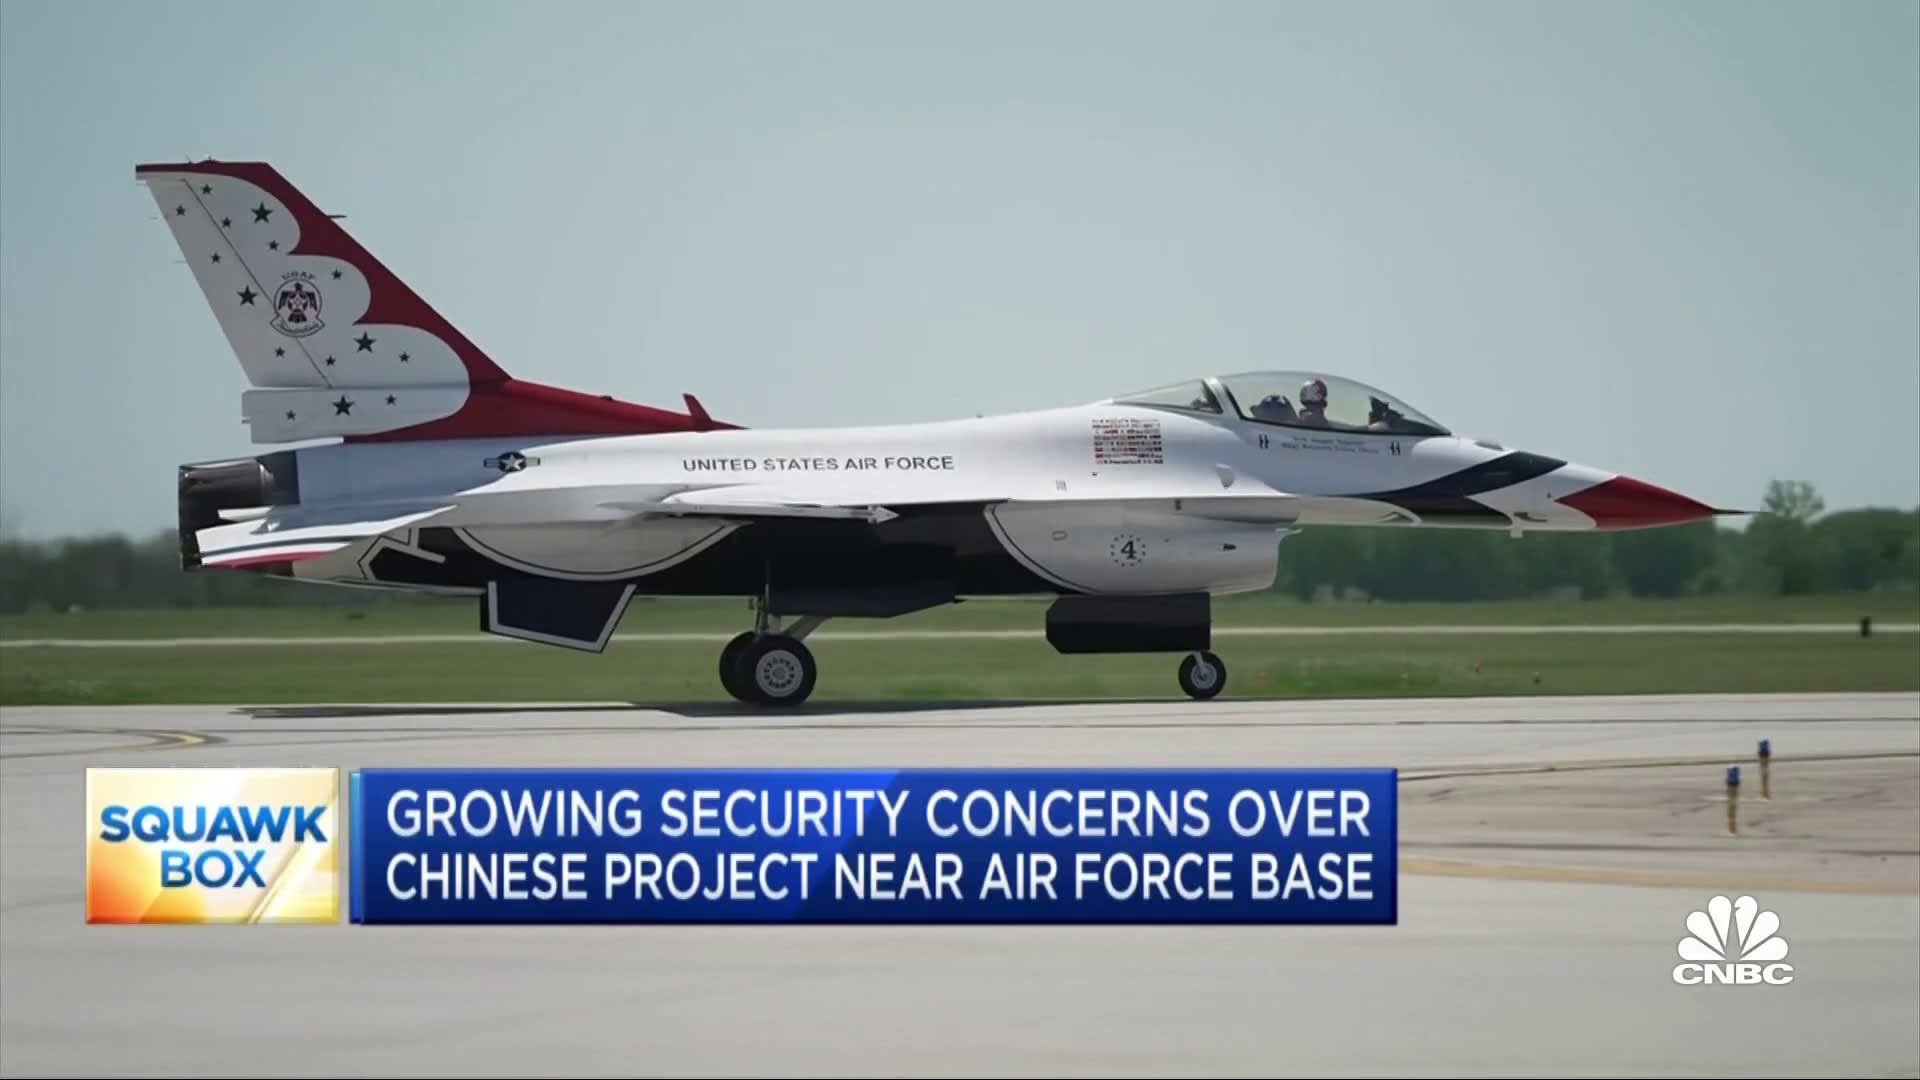 Security concerns grow over Chinese project near U.S. Air Force base